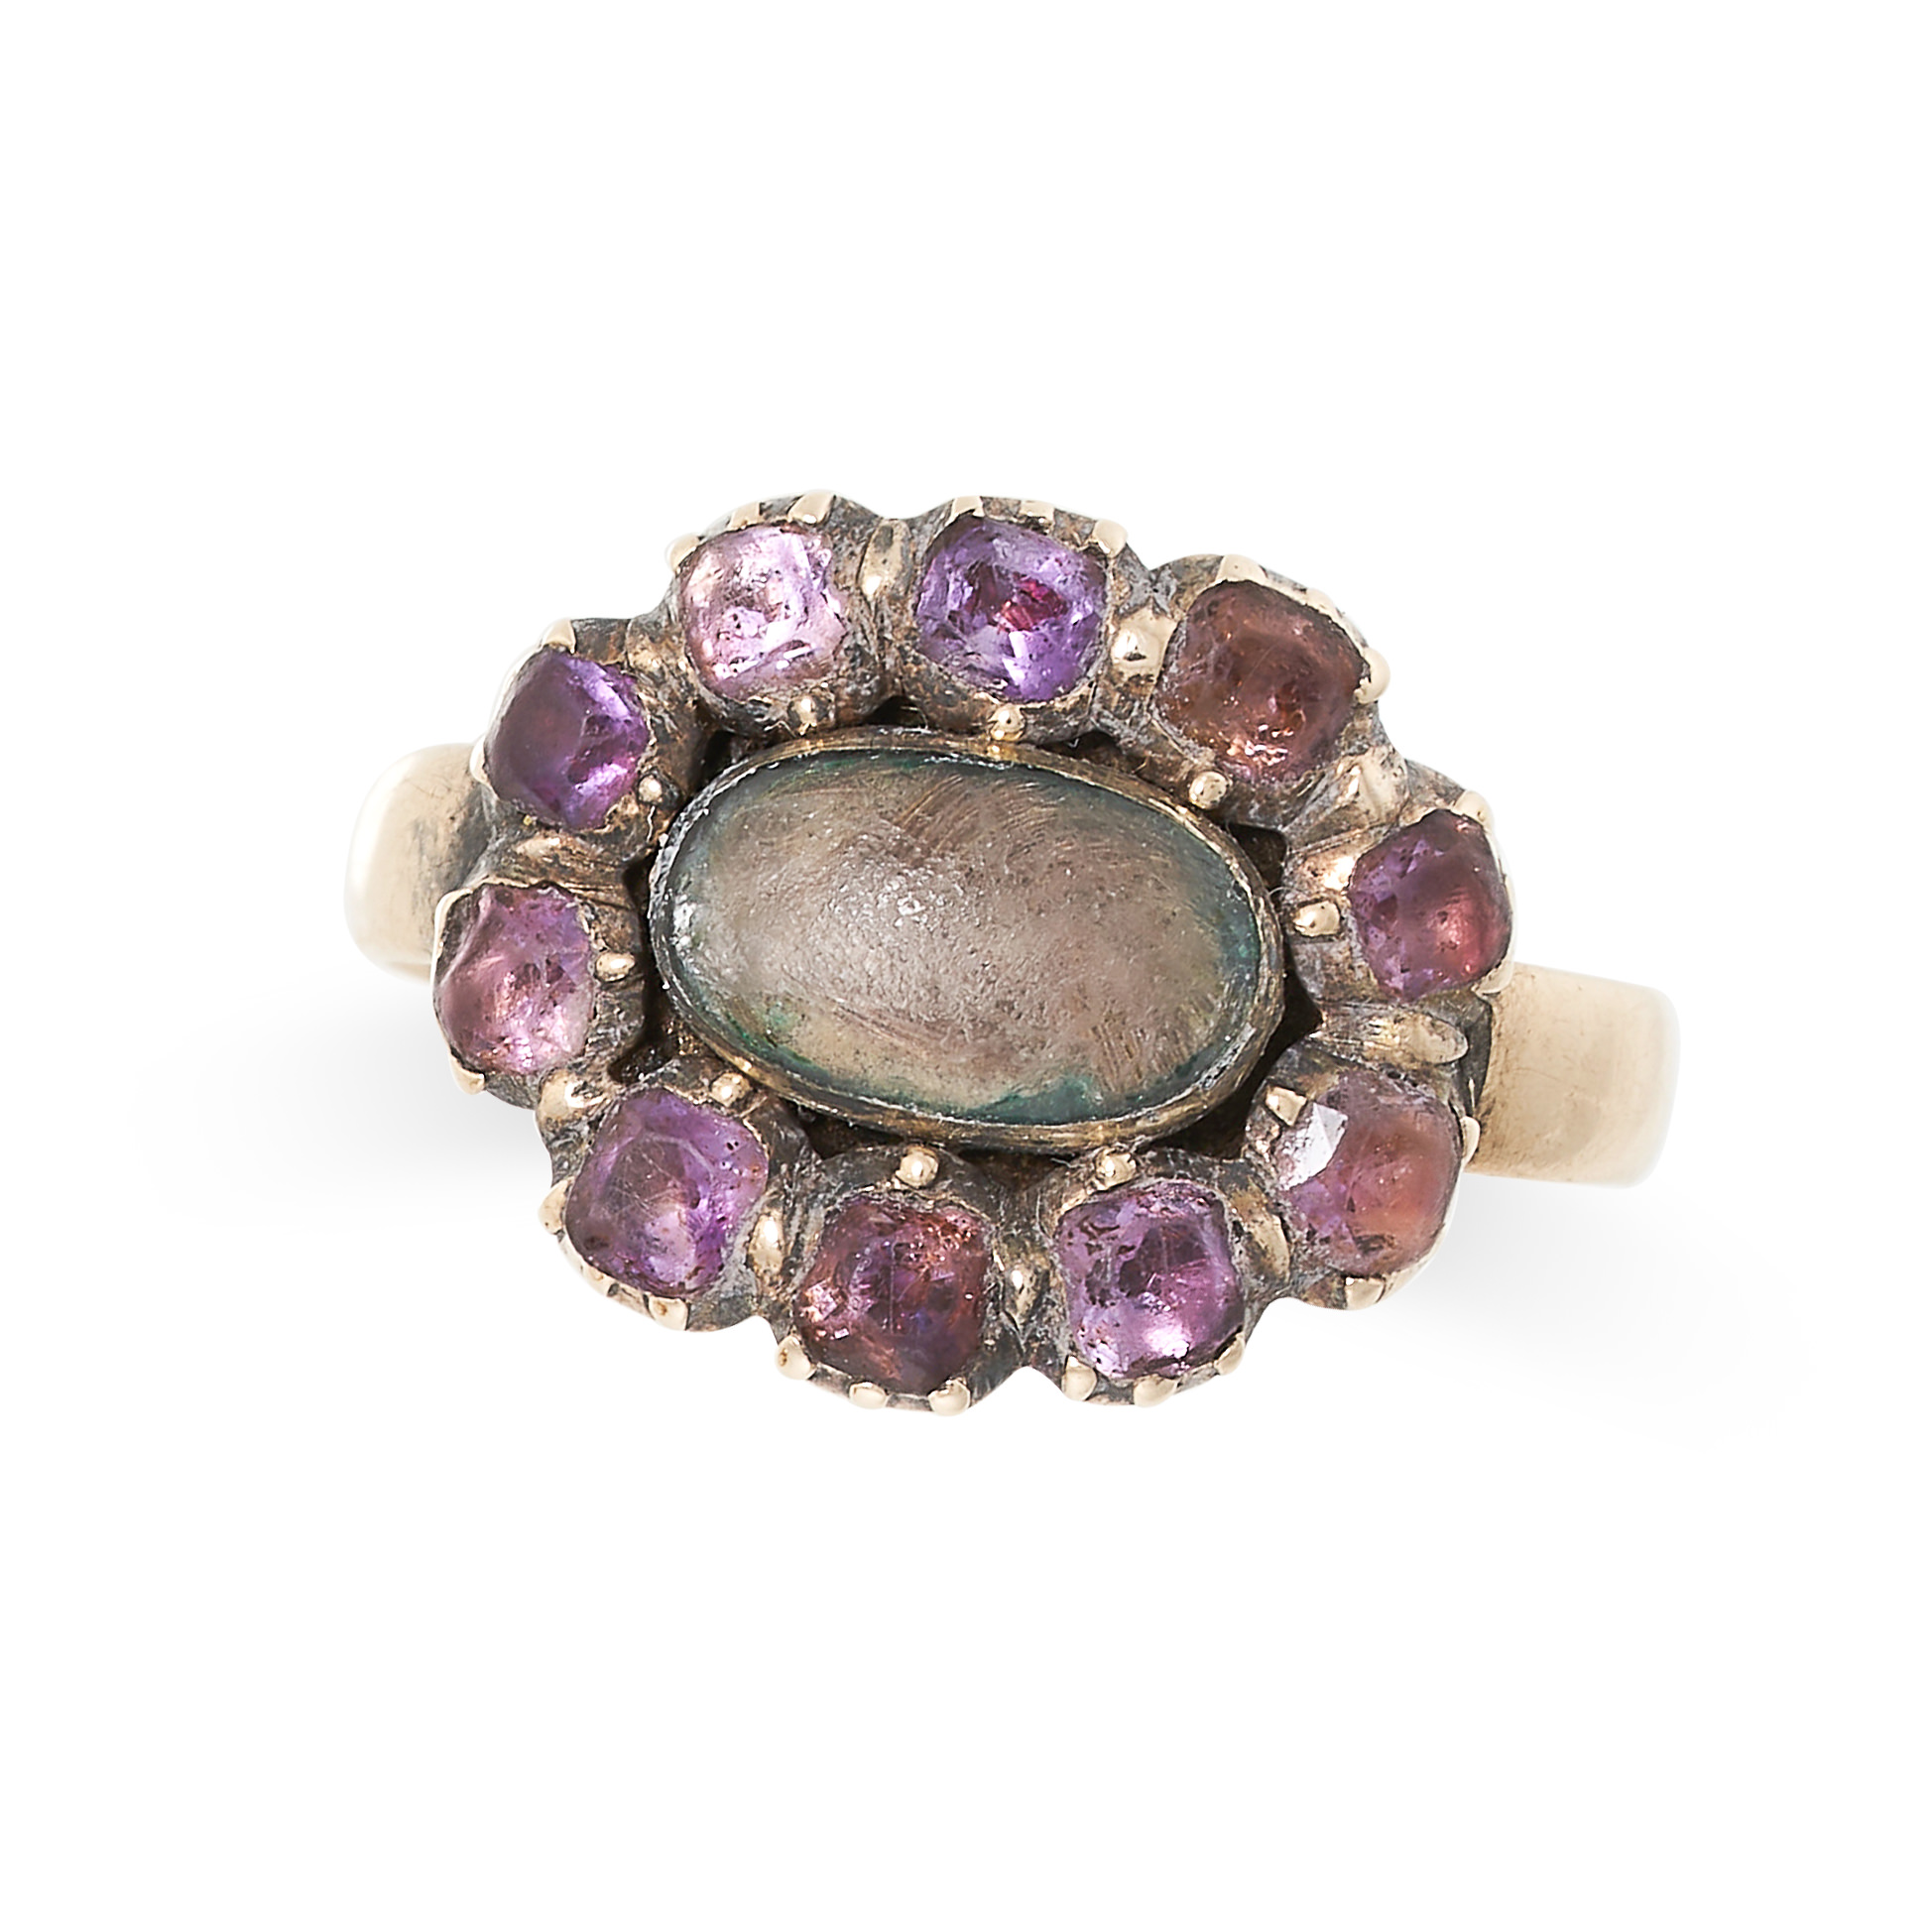 NO RESERVE - AN ANTIQUE GEORGEIAN AMETHYST MOURNING LOCKET CLUSTER RING, 19TH CENTURY in yellow